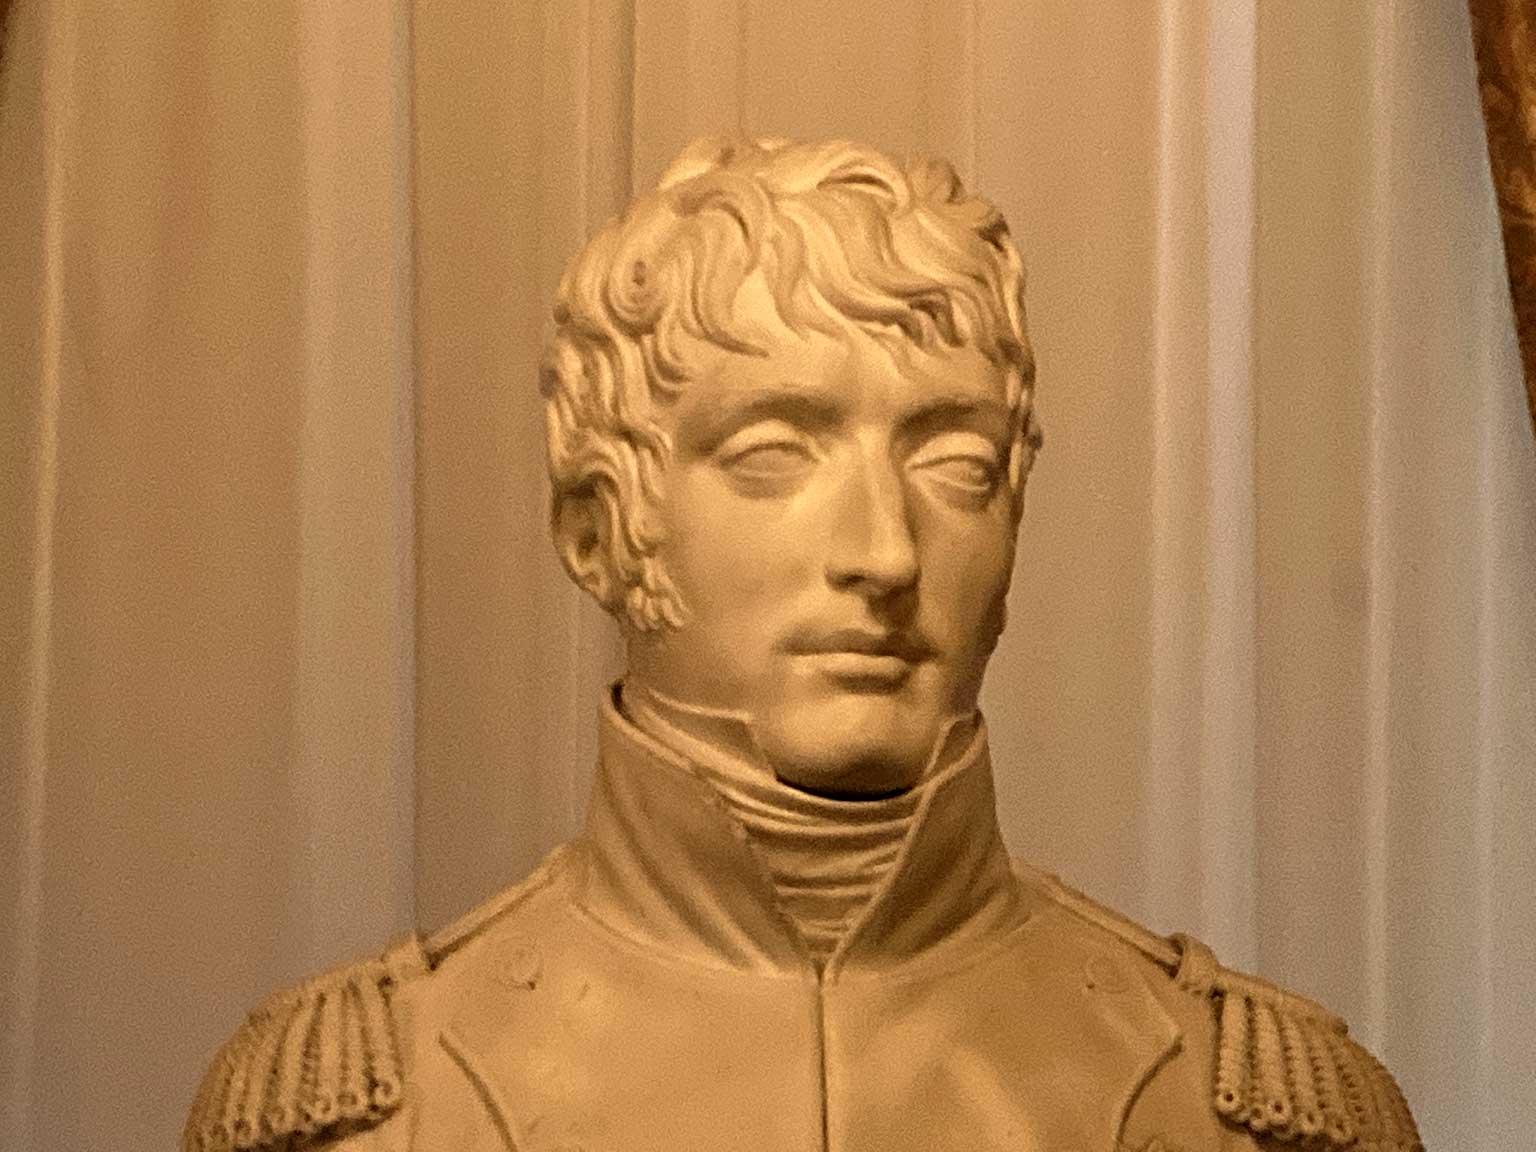 Bust of Louis Napoleon, King of Holland, by P. Cartellier from 1806